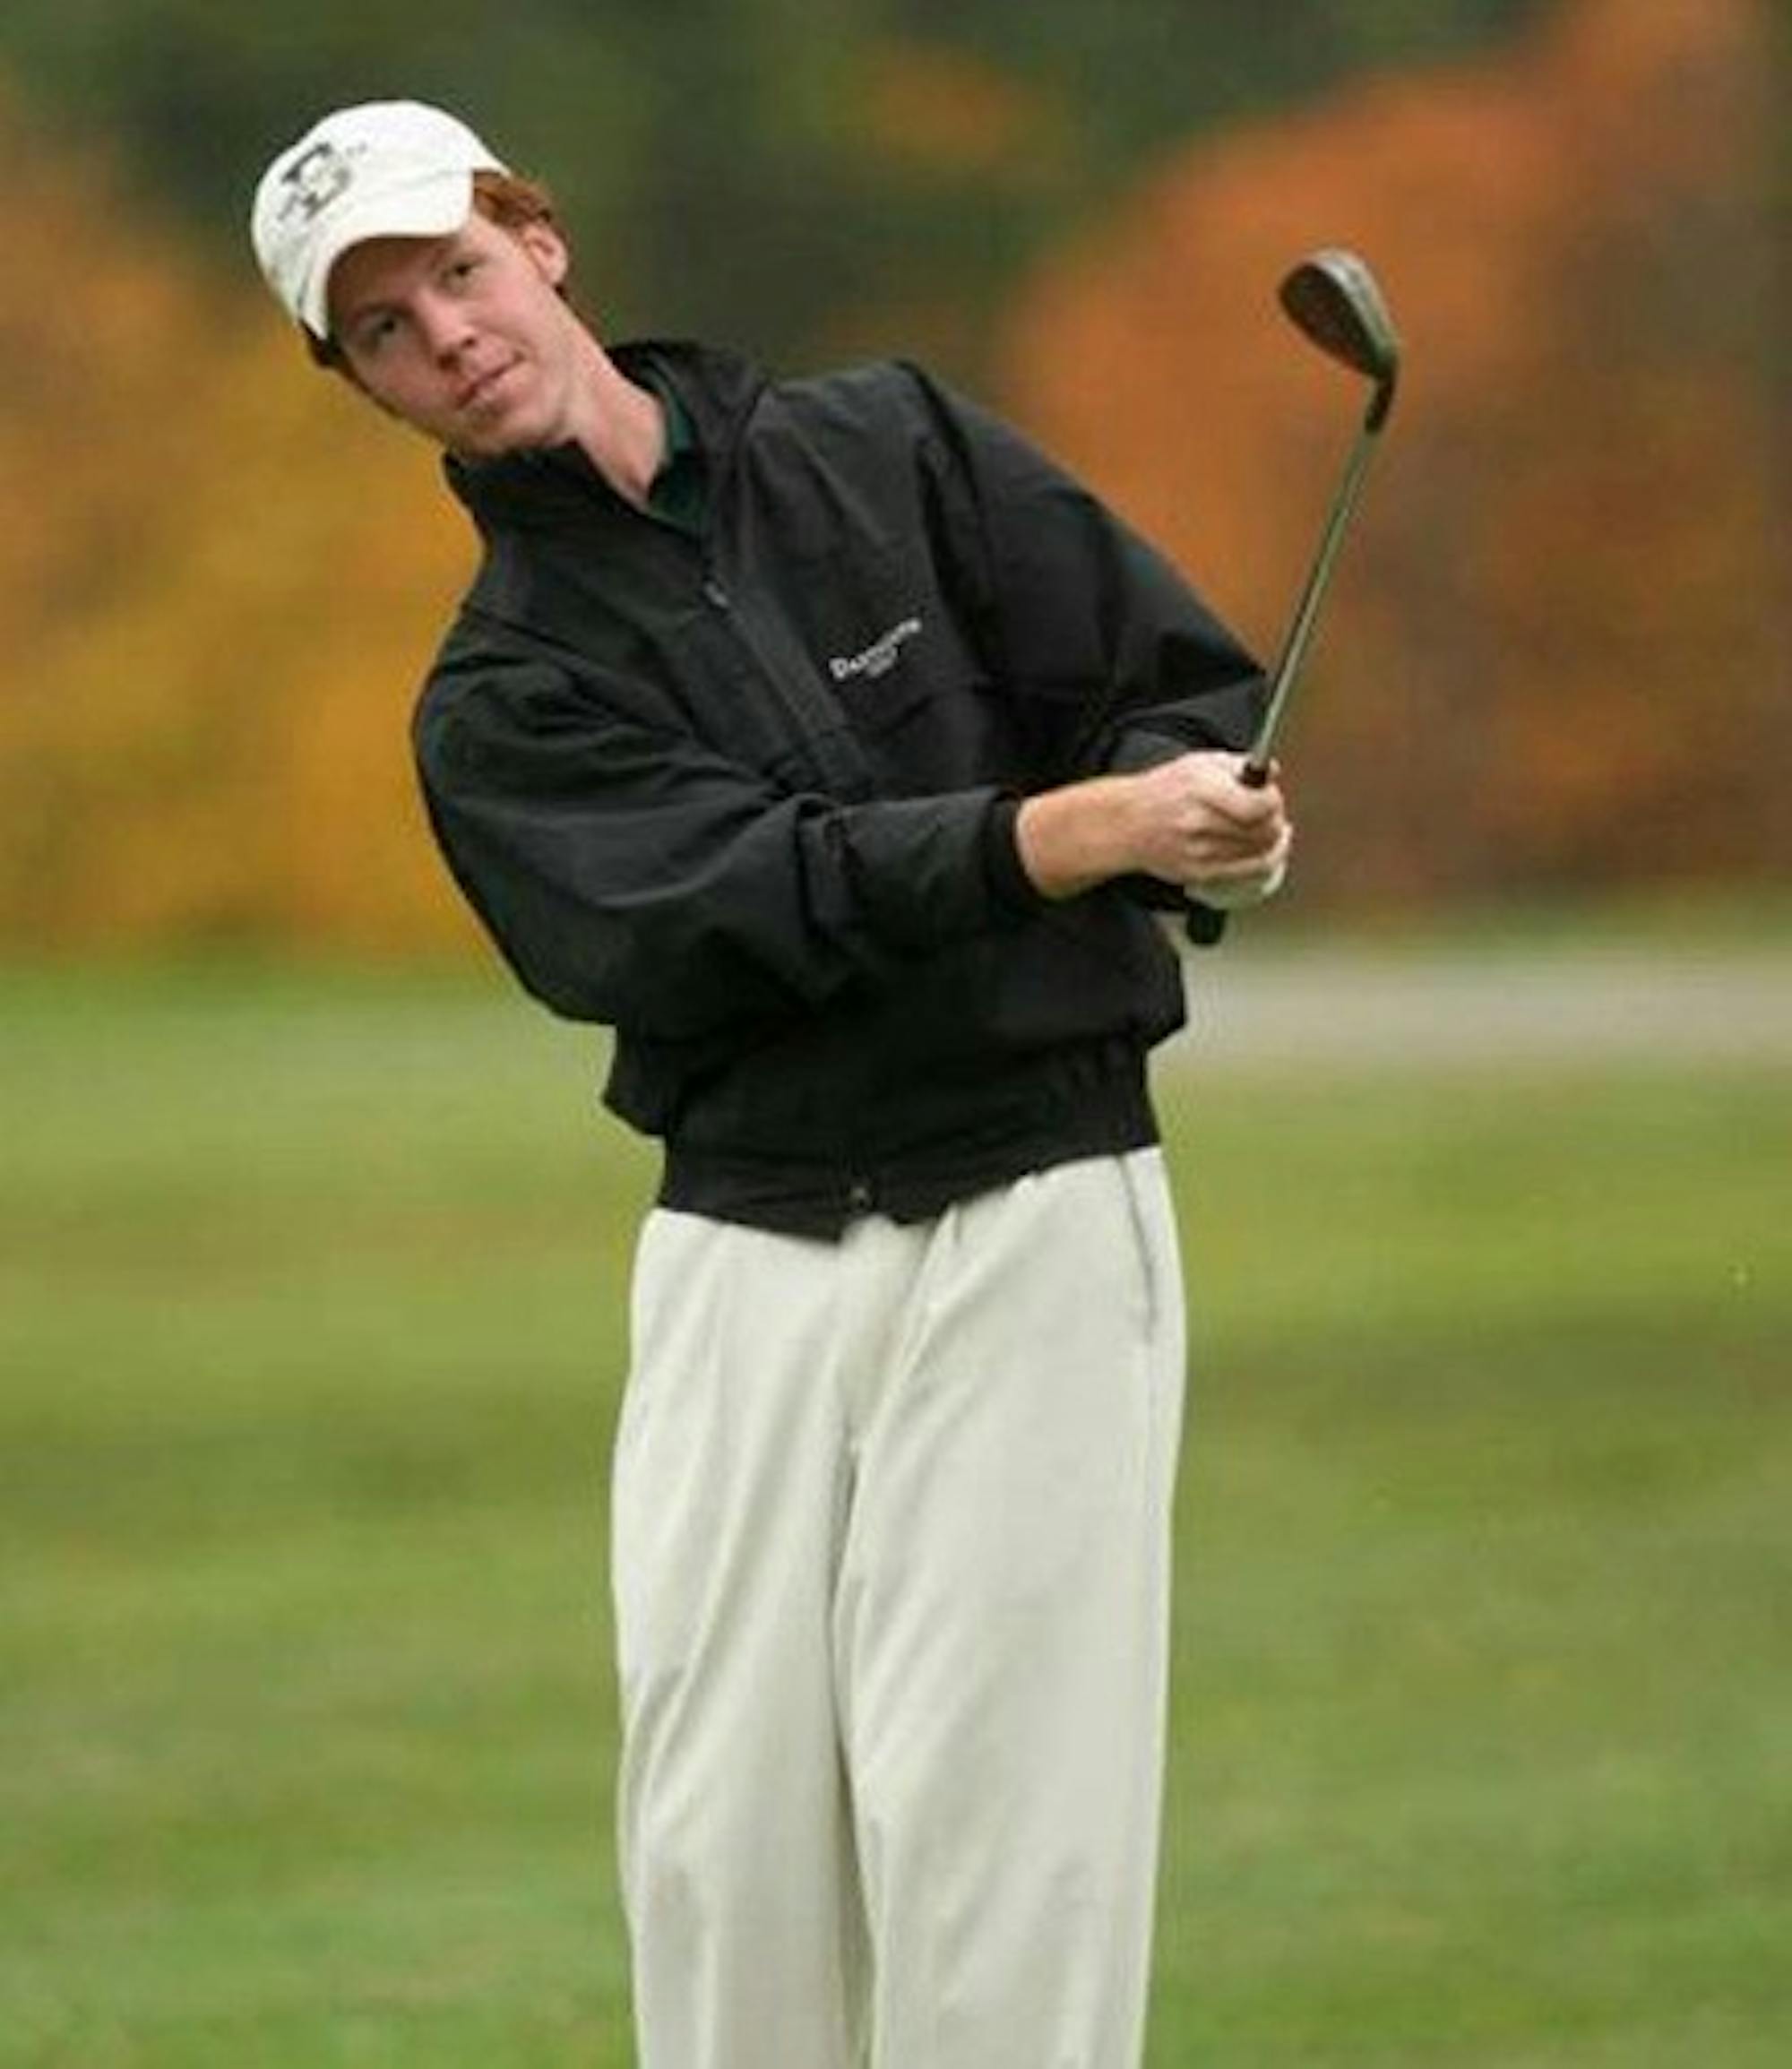 Captain Jamie Wallace '08 shot a two-day 152 to finish tied for 15th place.